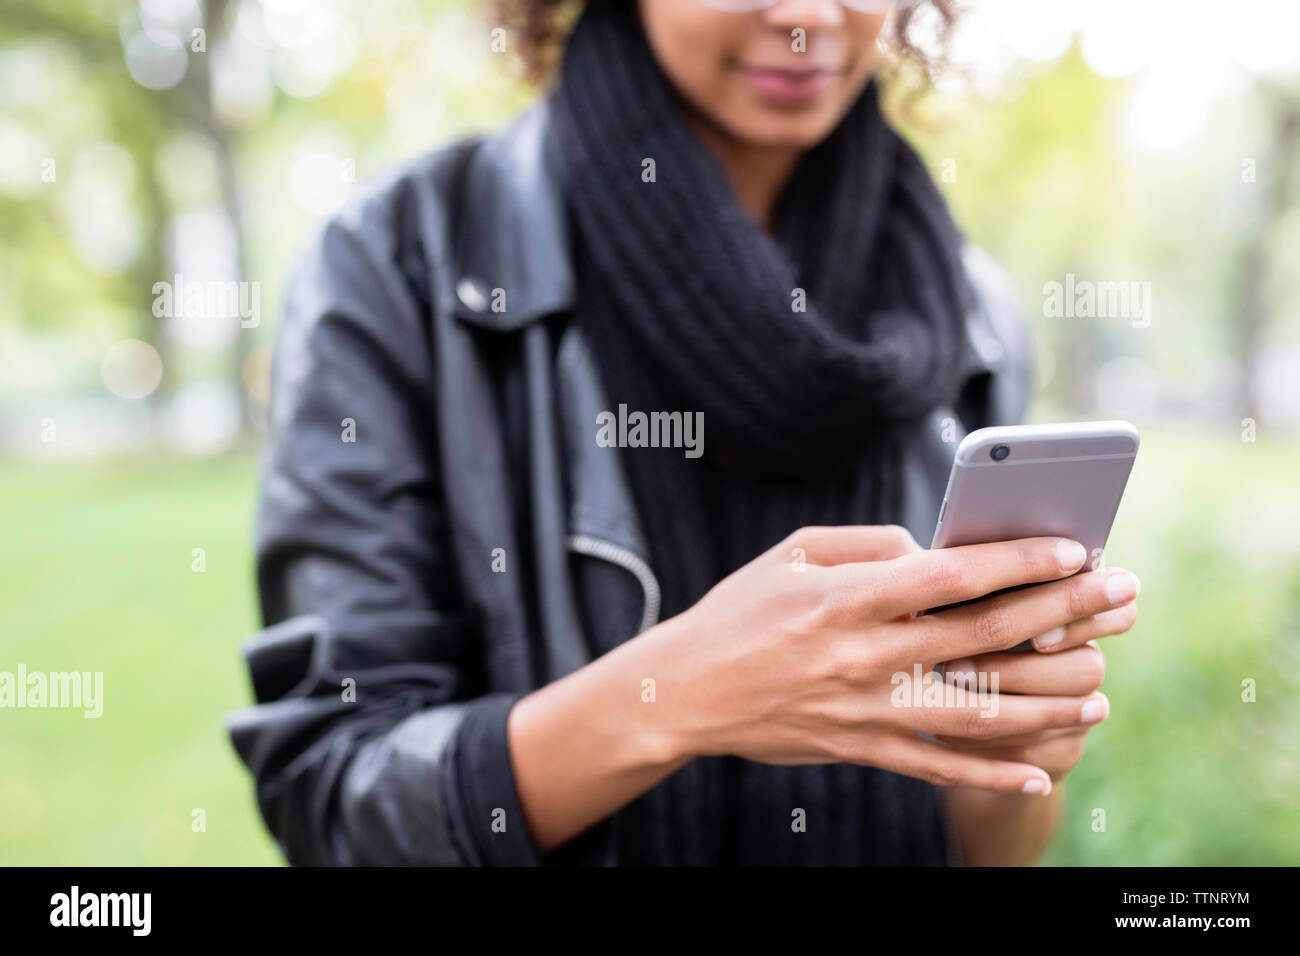 Midsection of woman using mobile phone in park Banque D'Images